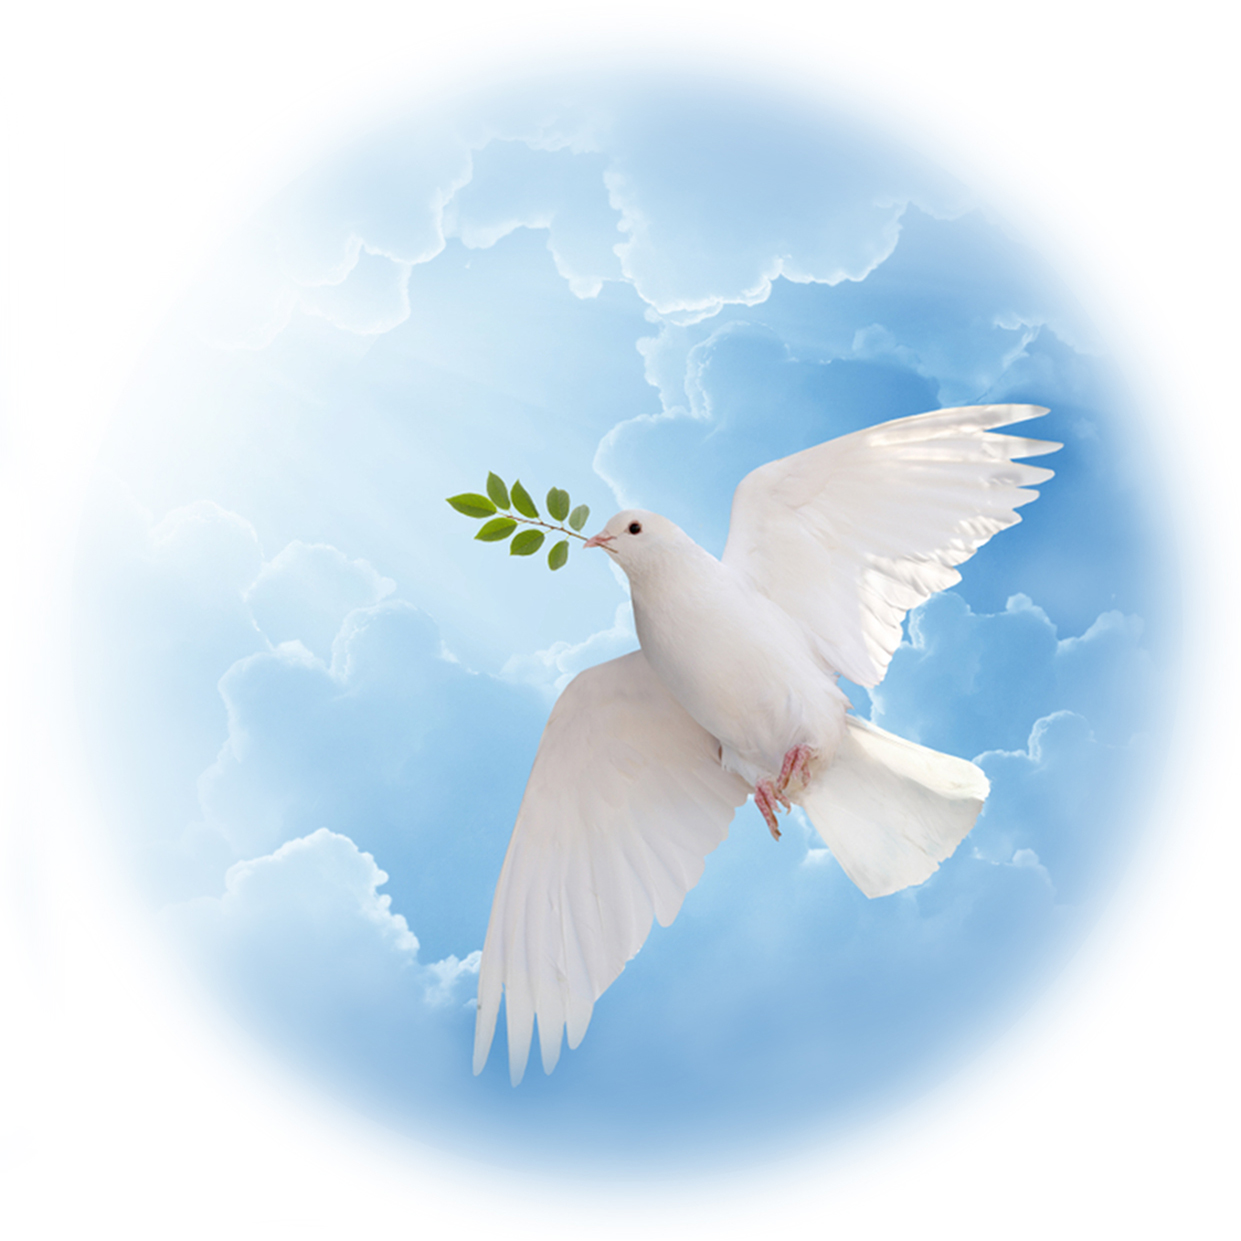 DOVE OF HOPE